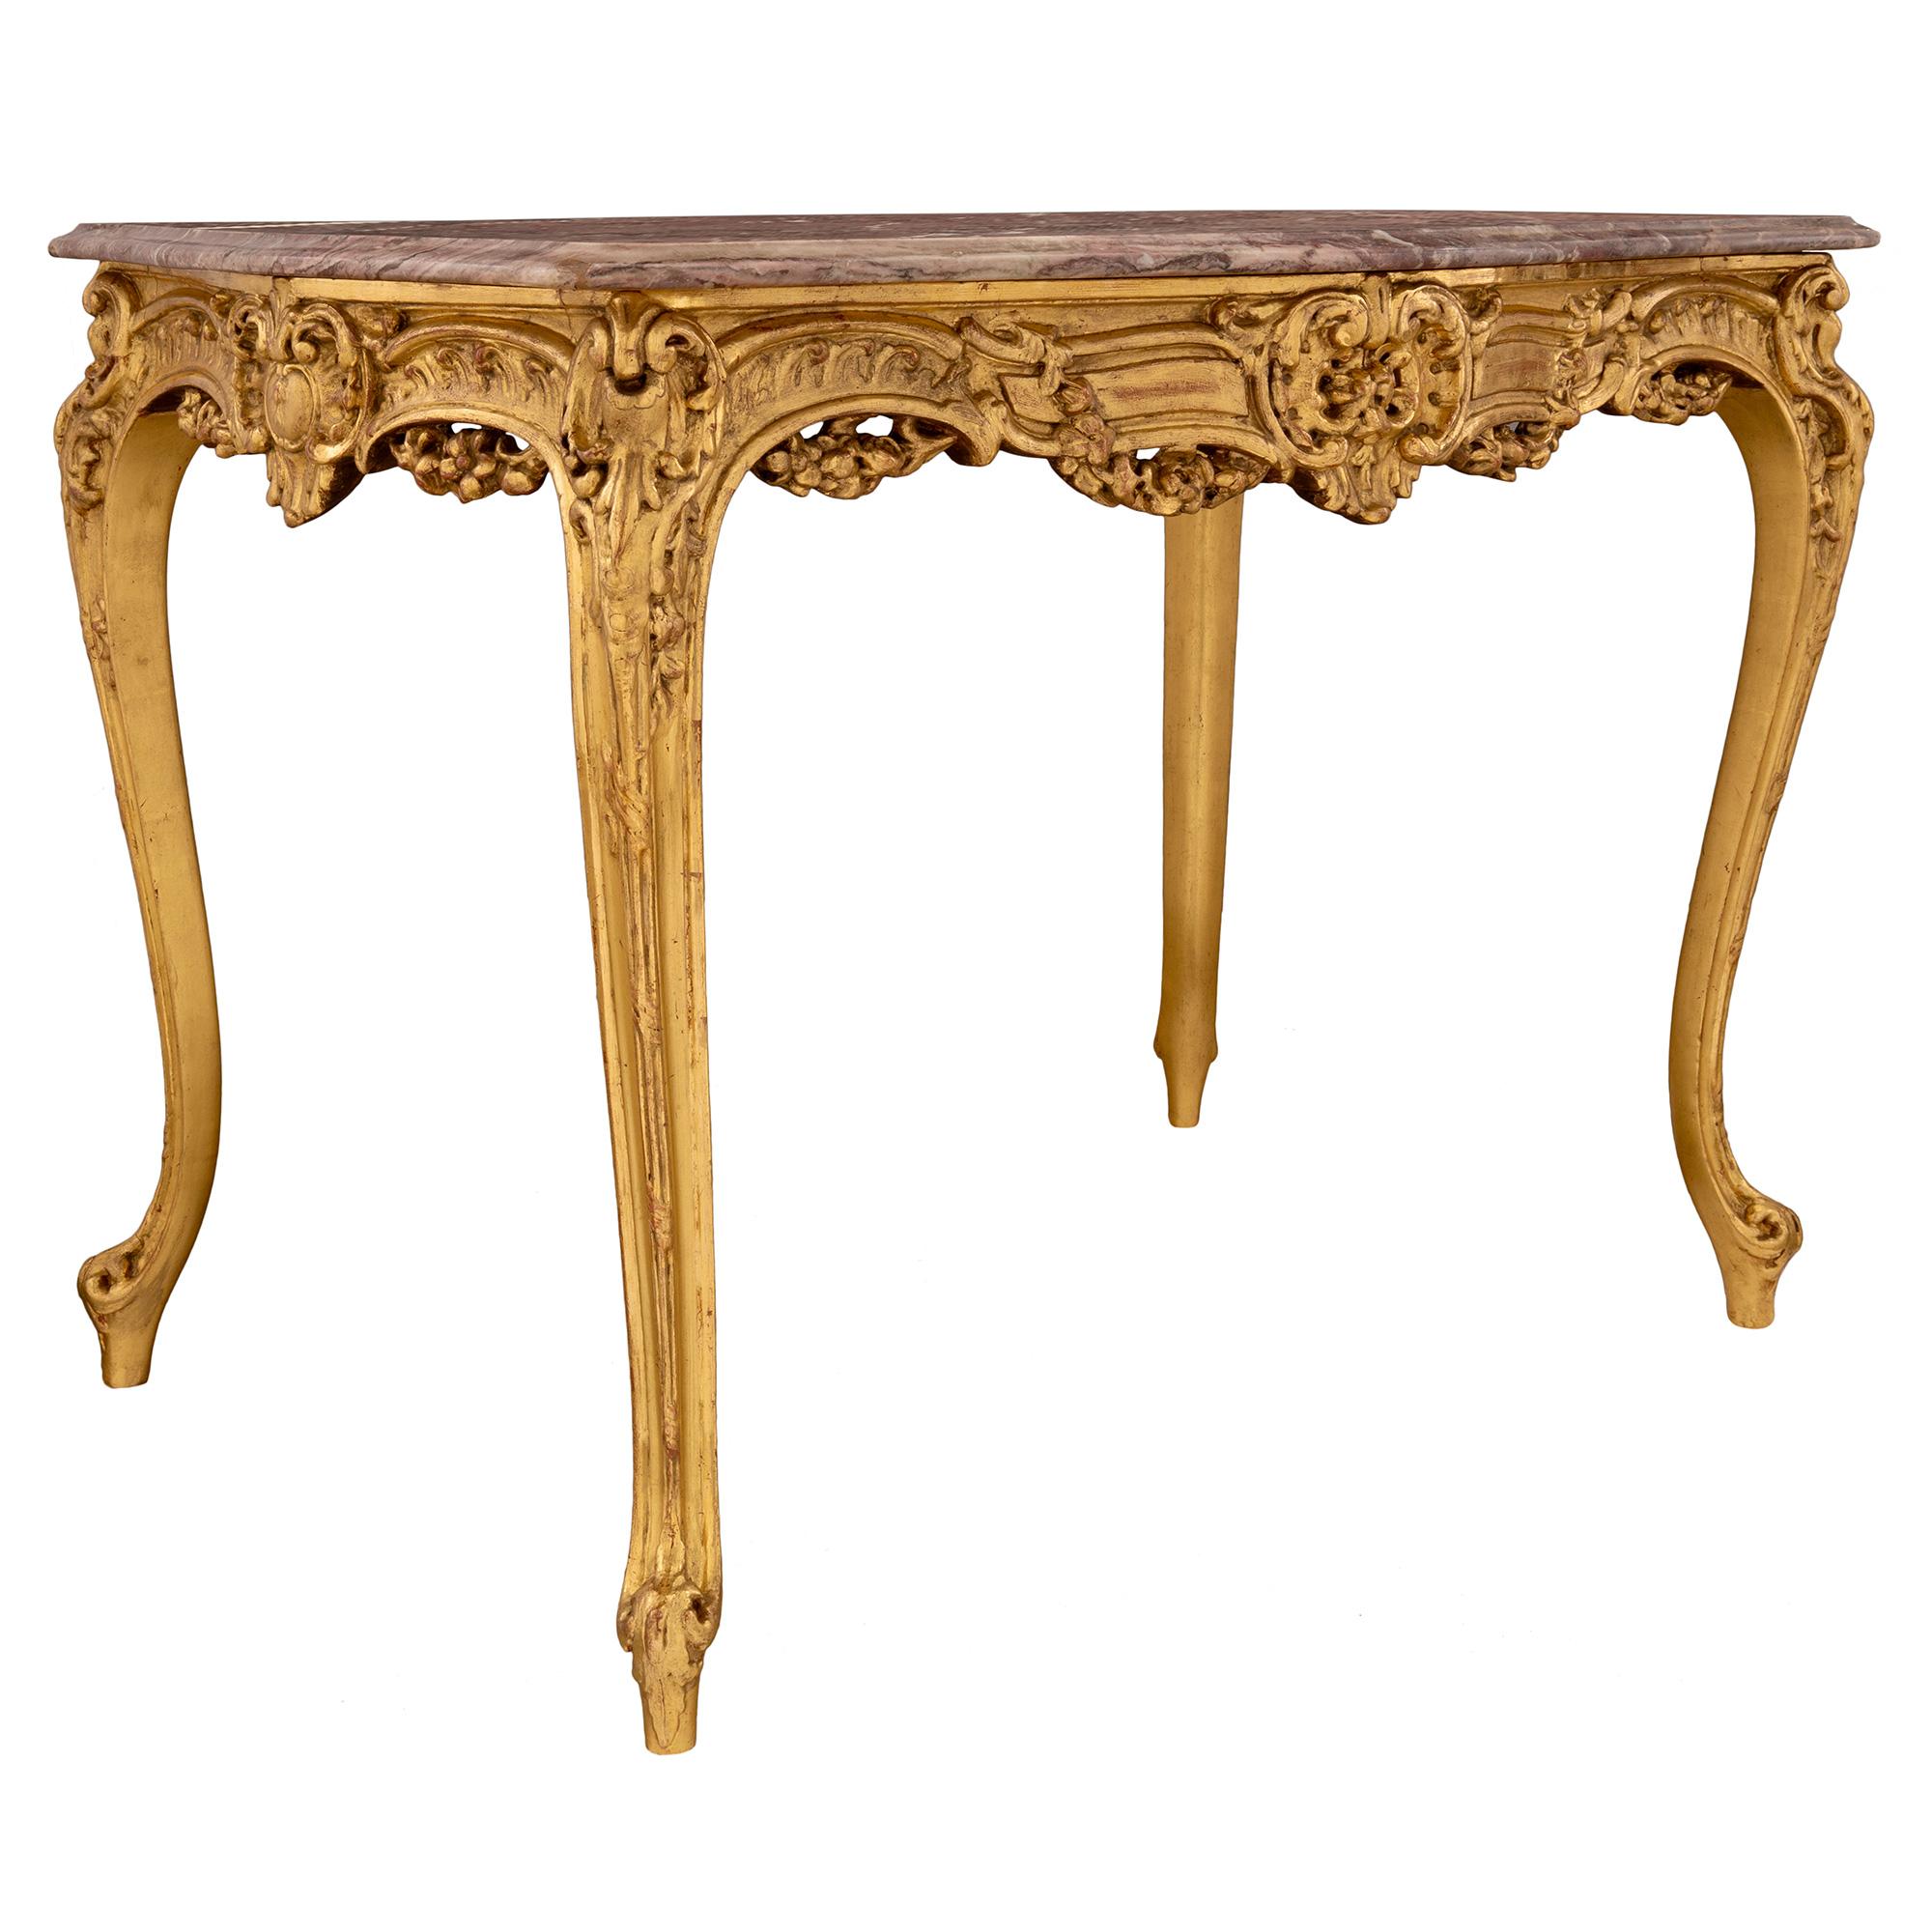 French 19th Century Louis XV Style Giltwood and Marble Center Table In Good Condition For Sale In West Palm Beach, FL